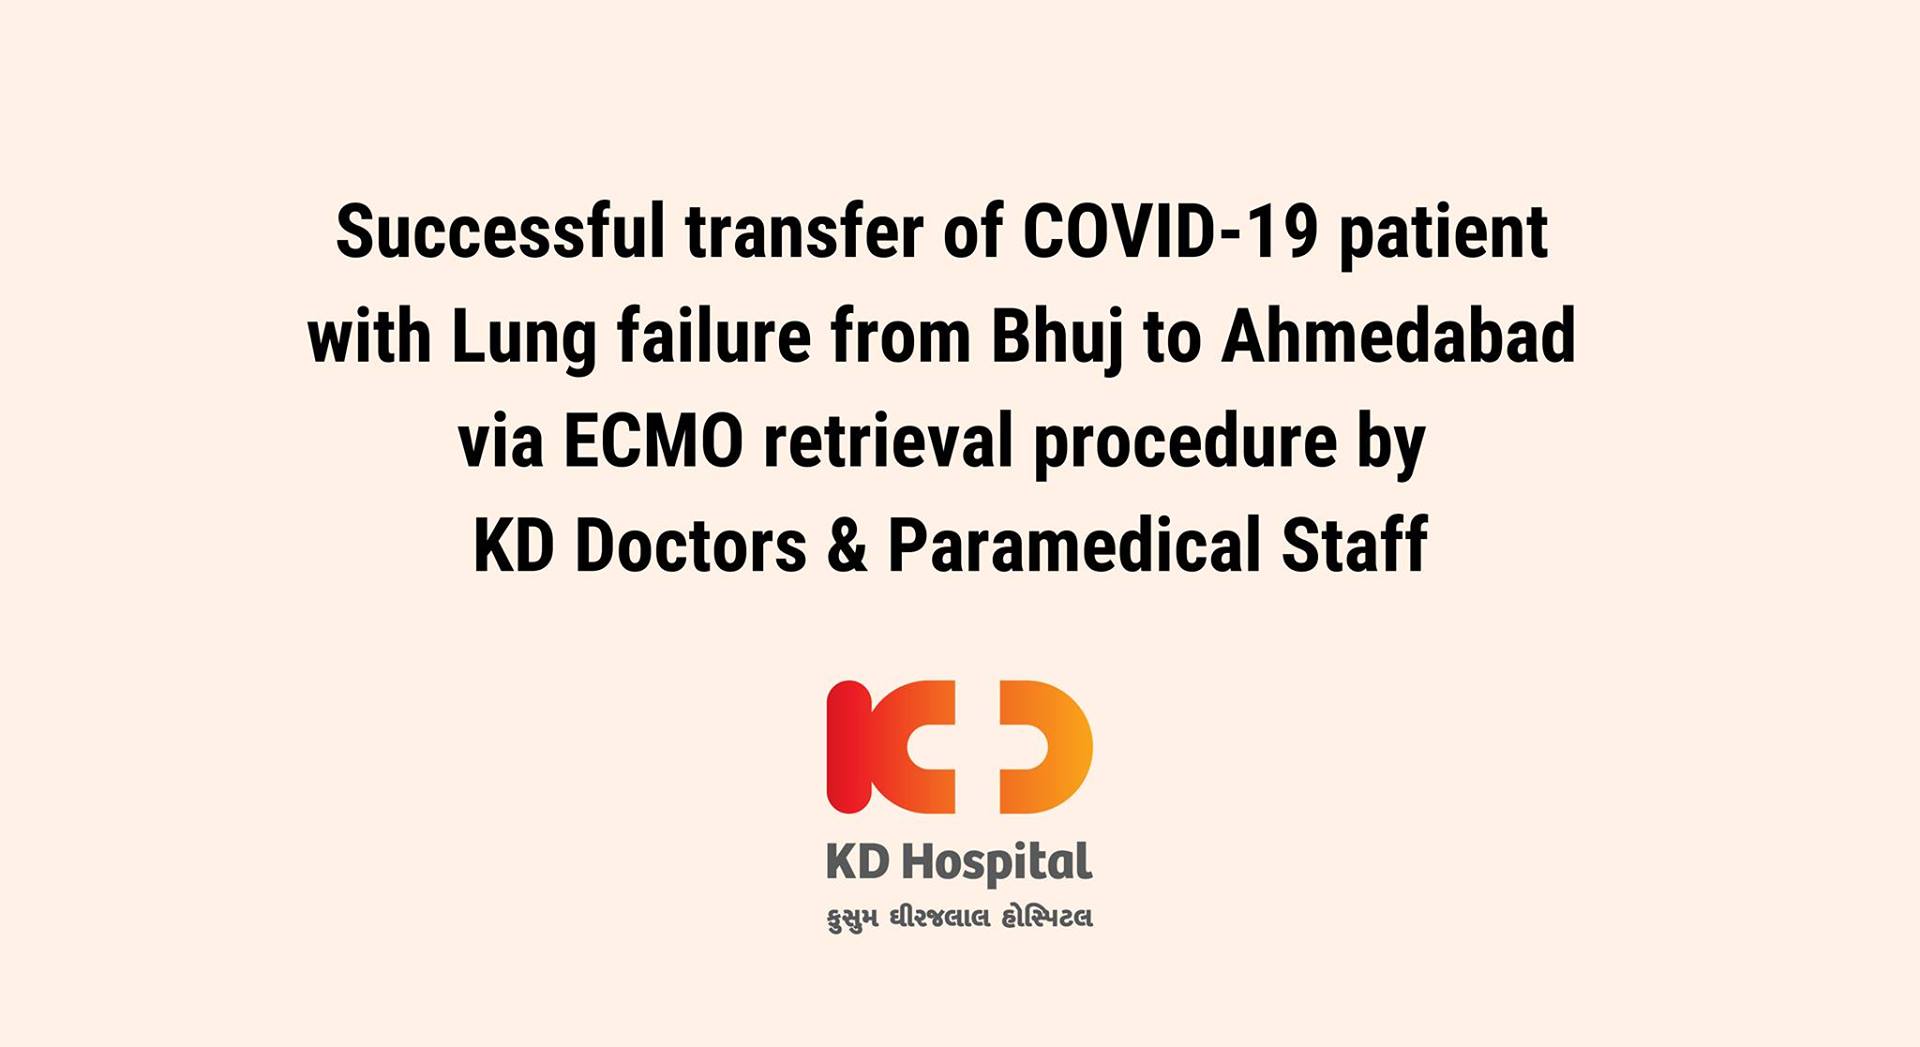 Here's yet another exceptional case of medical intervention undertaken by our team of doctors and paramedical staff.

Our team reached in time, 300 km away in Bhuj to rescue a 28-year-old patient suffering from Lungs failure due to a Covid-19 infection. It was a relief for everyone after successfully providing him with ECMO retrieval support and he was brought to KD Hospital, Ahmedabad.

We are proud of our Doctors & our Staff and promise to always spread Hope, Health & Happiness.

#KDHospital #Care #ECMO #PatientCare #PatientFirst #Compassion #Safety #PatientSafety #SafetyComesFirst #SafetyFirst #SafetyMeasures #Diagnosis #Therapeutics #Awareness #wellness #goodhealth #Nursing #NABHHospital #QualityCare #hospitals #doctors #healthcare #medical #health #physicians #surgery #surgeon #Ahmedabad #Gujarat #India